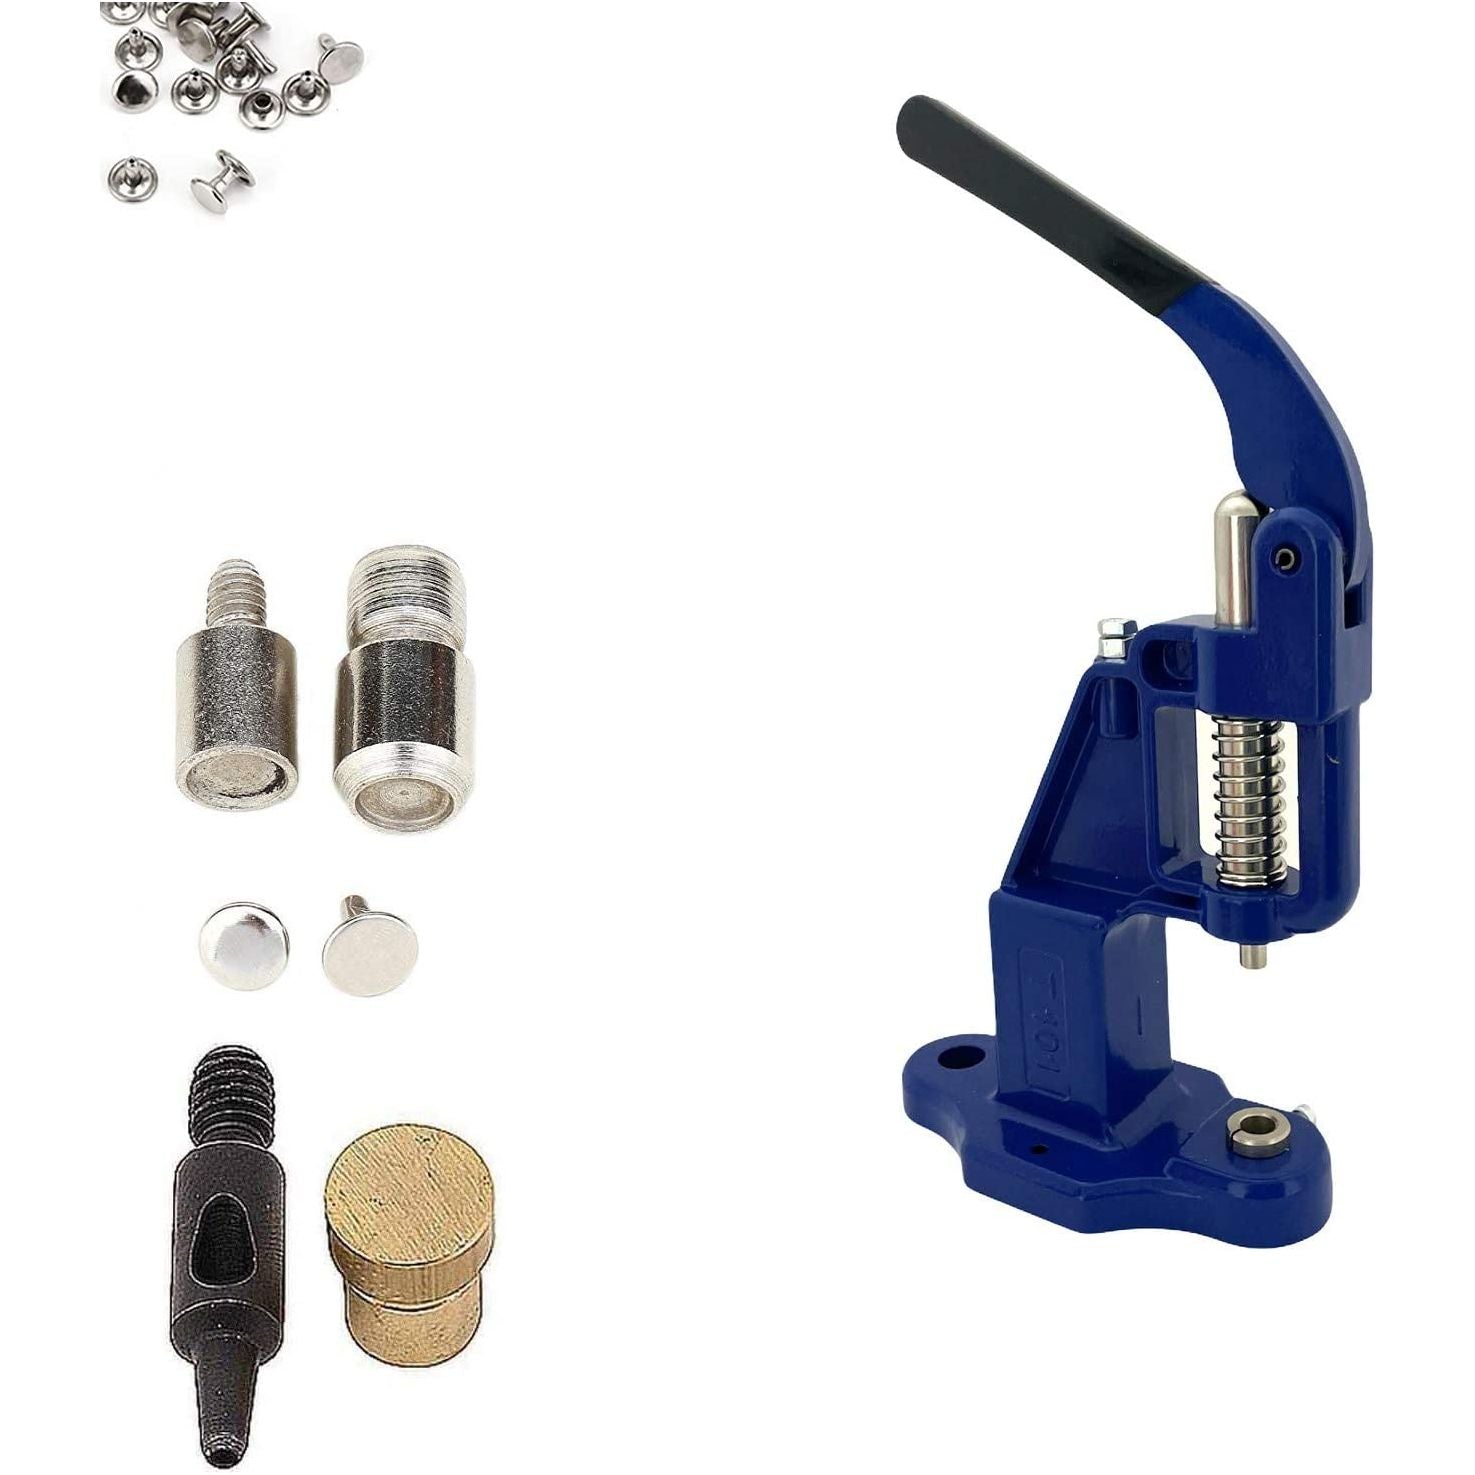 Rivet Setting DIY Kit All in One, Rivet Press Machine, 6 pcs Single and  Double Round Cap Rivet Setter Dies and 2 mm Hole Puncher